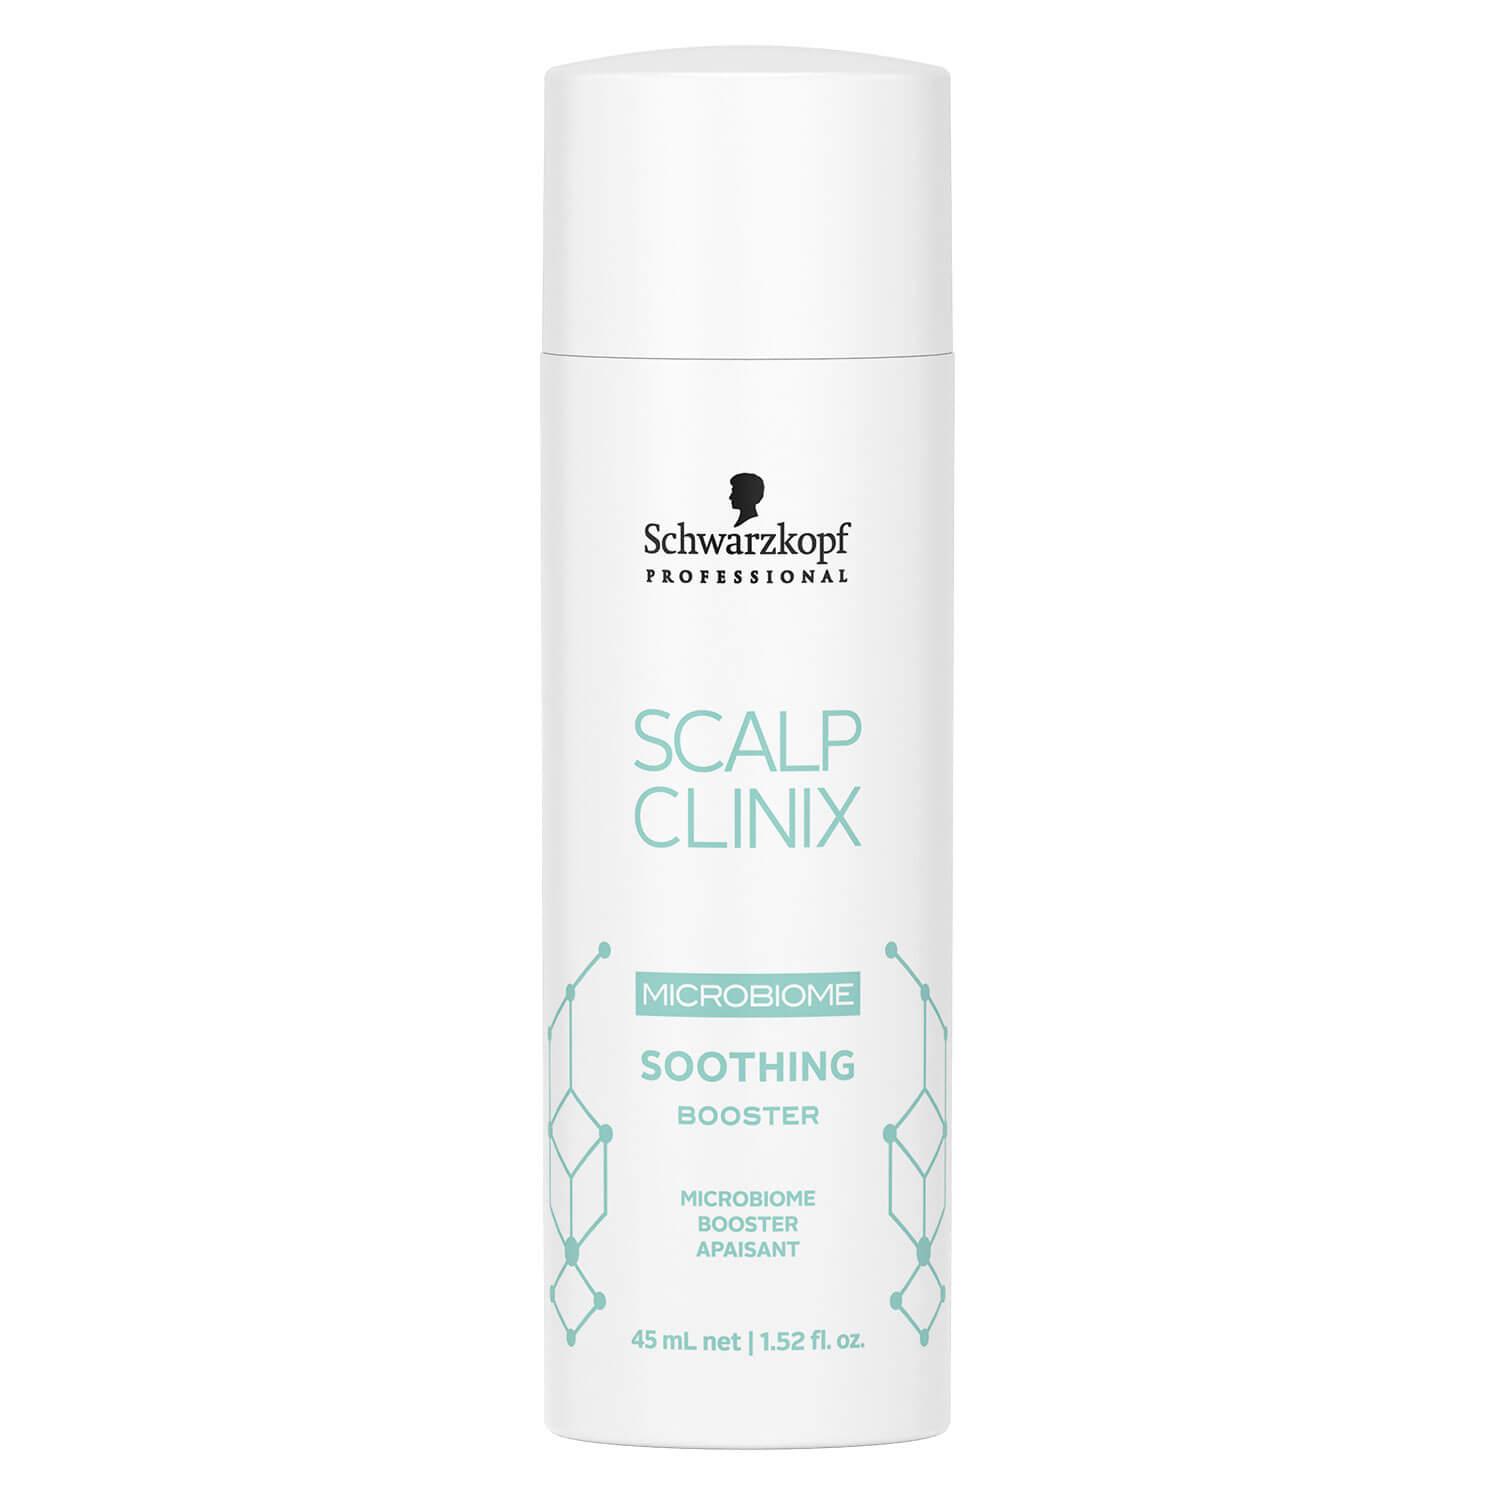 Scalp Clinix - Soothing Booster Salon Treatment